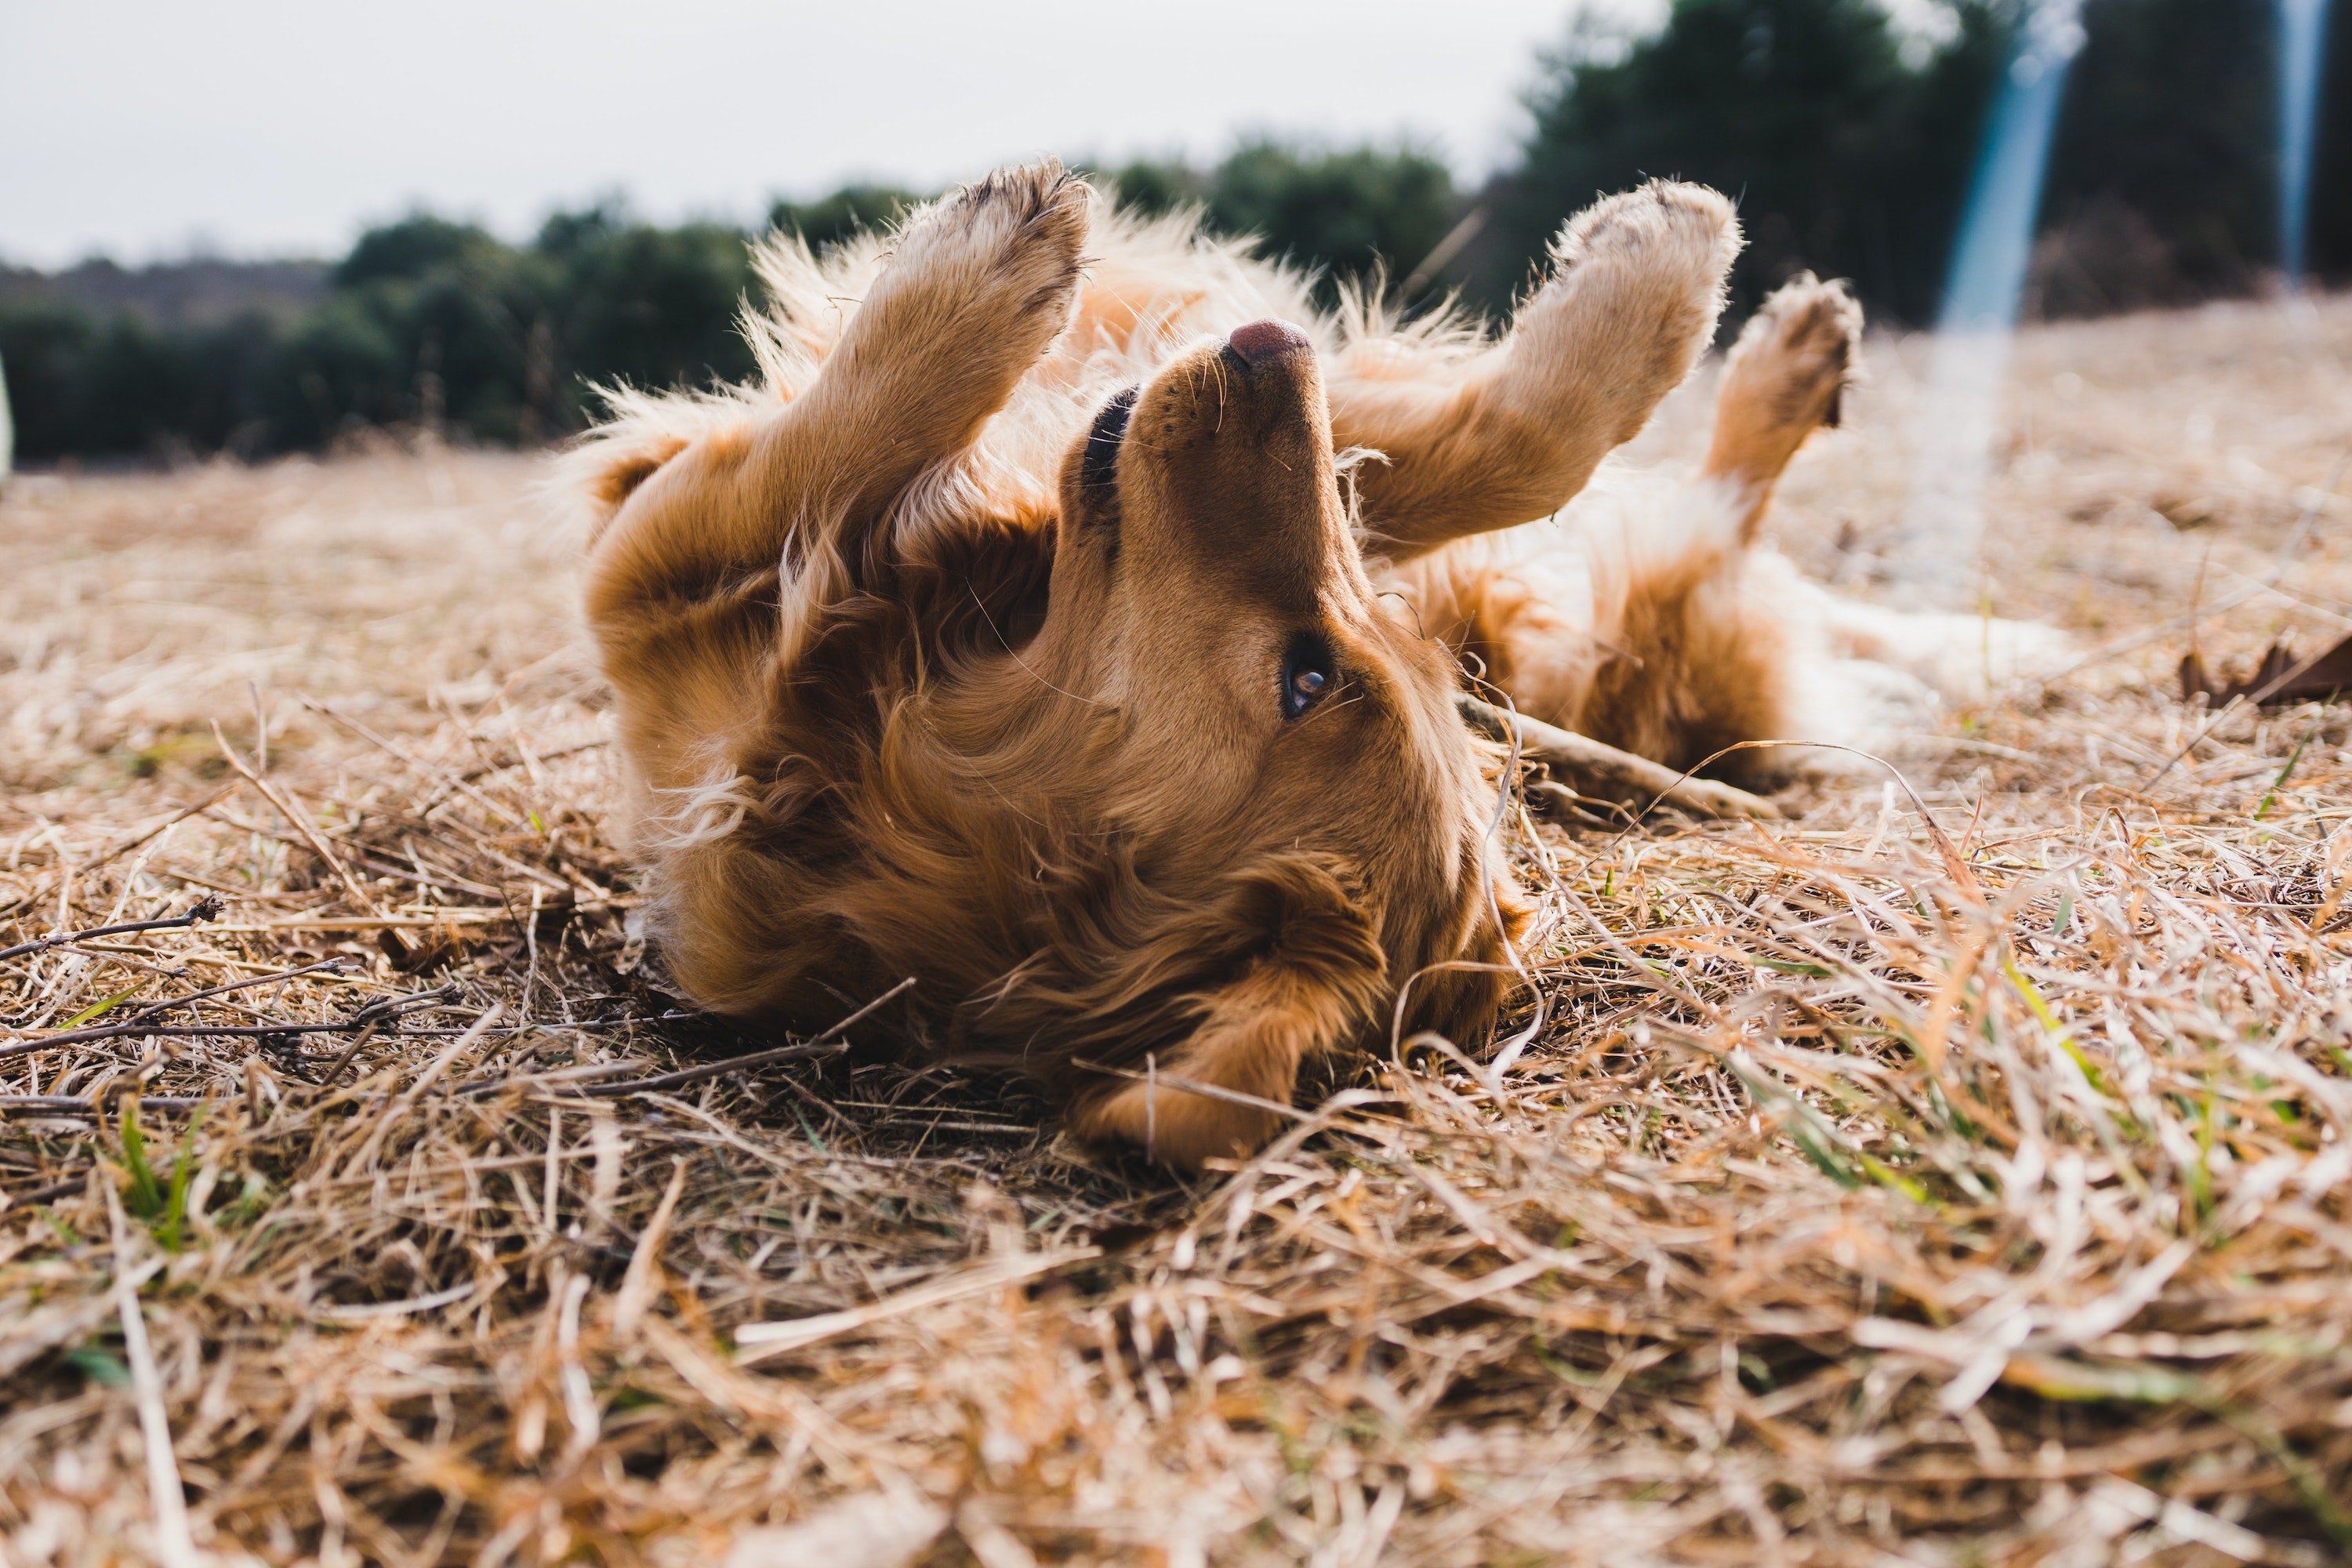 Which allergies can make your dog itch?